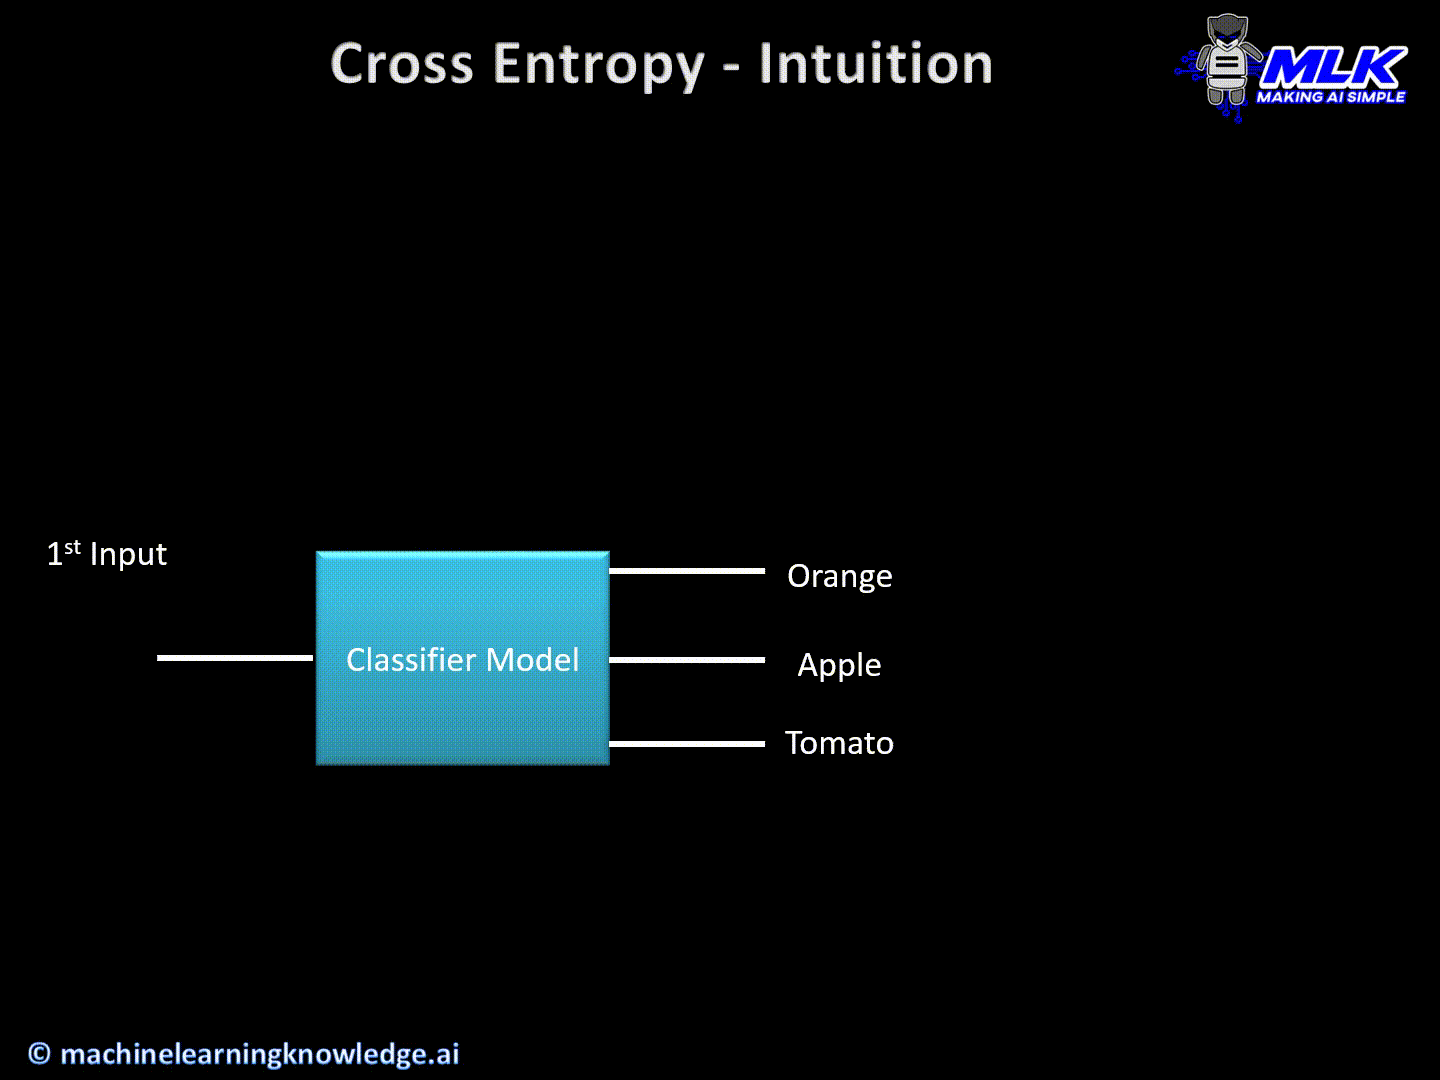 Cross Entropy - Intuition